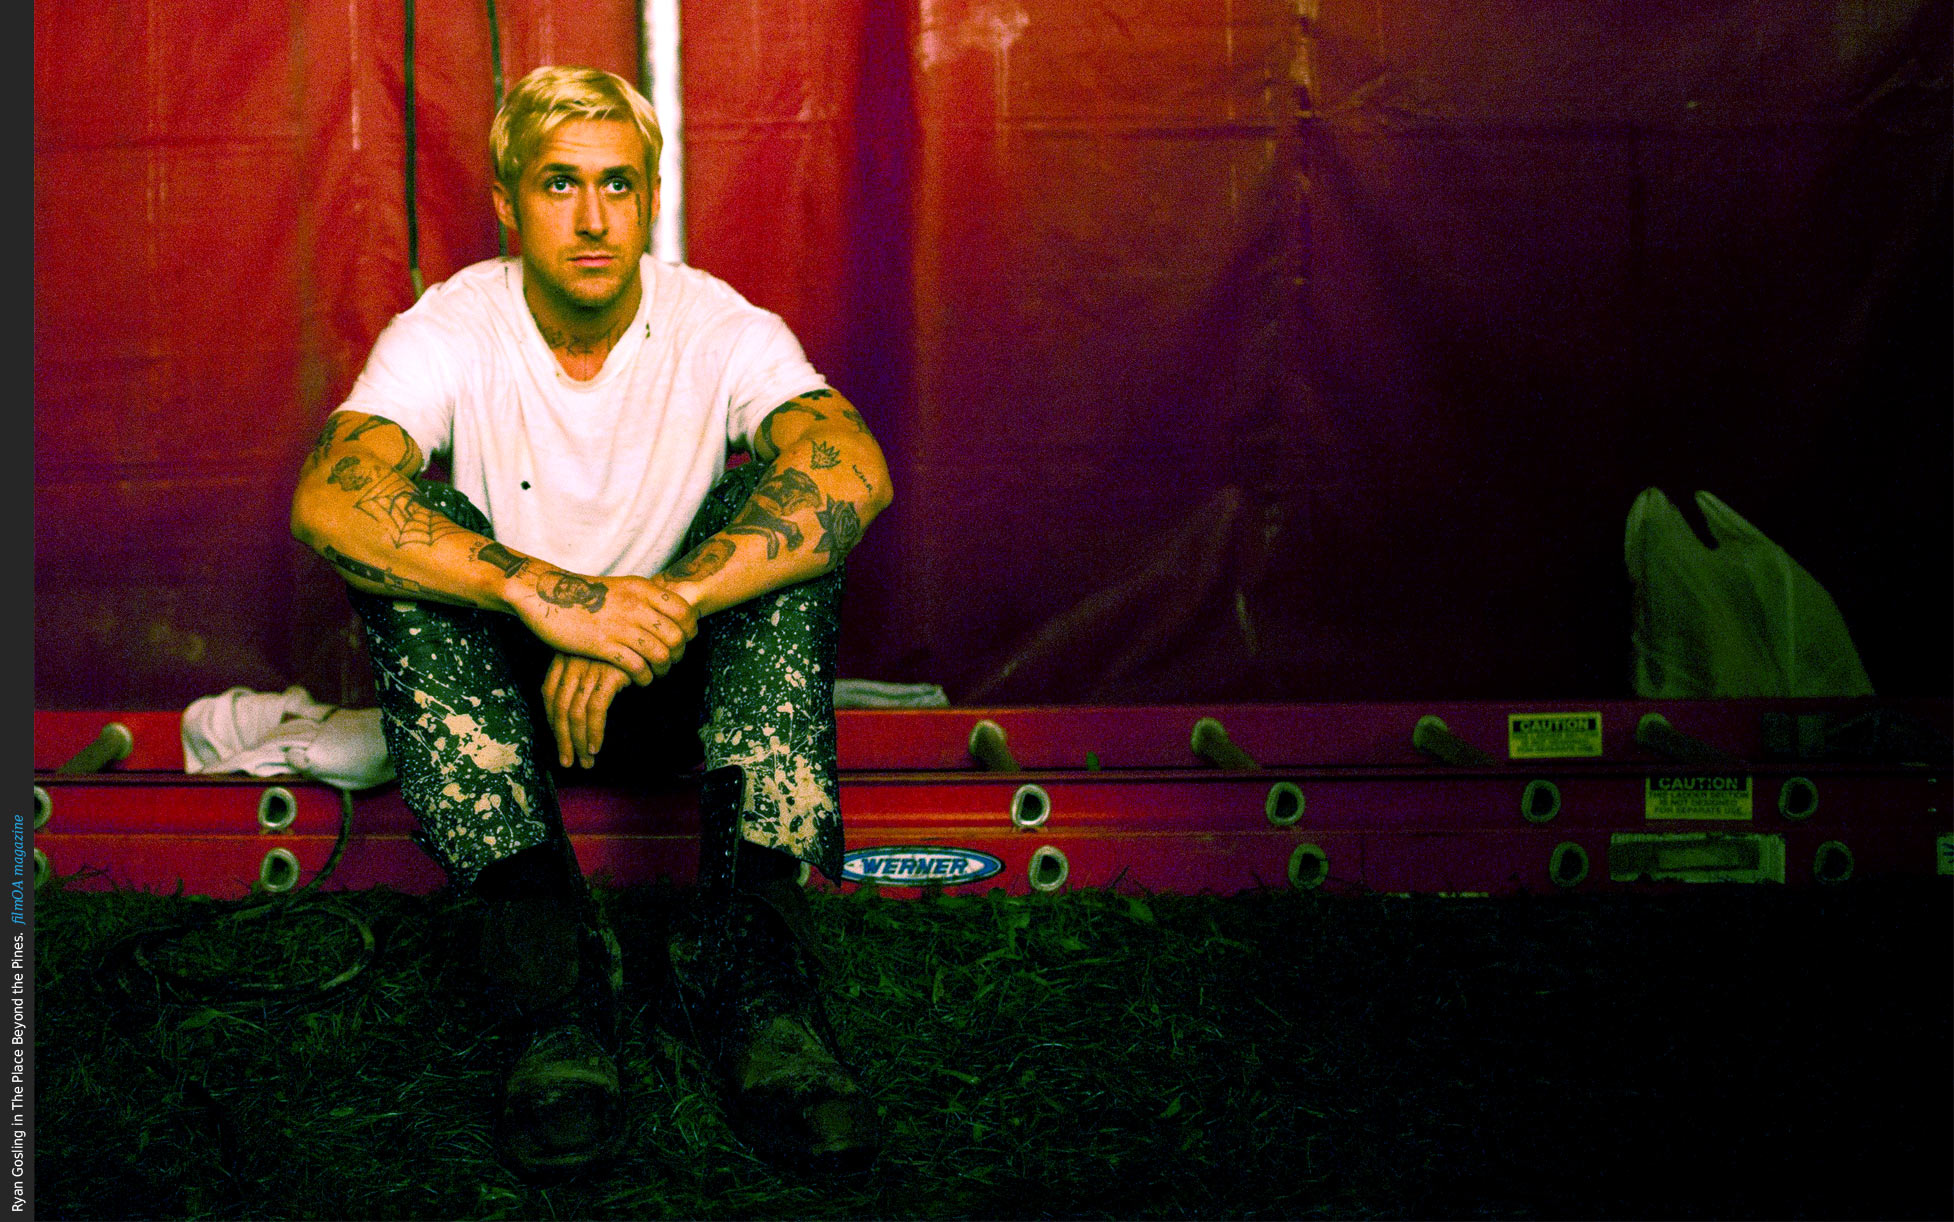 Ryan Gosling tattoos blond The Place Beyond the Pines poster